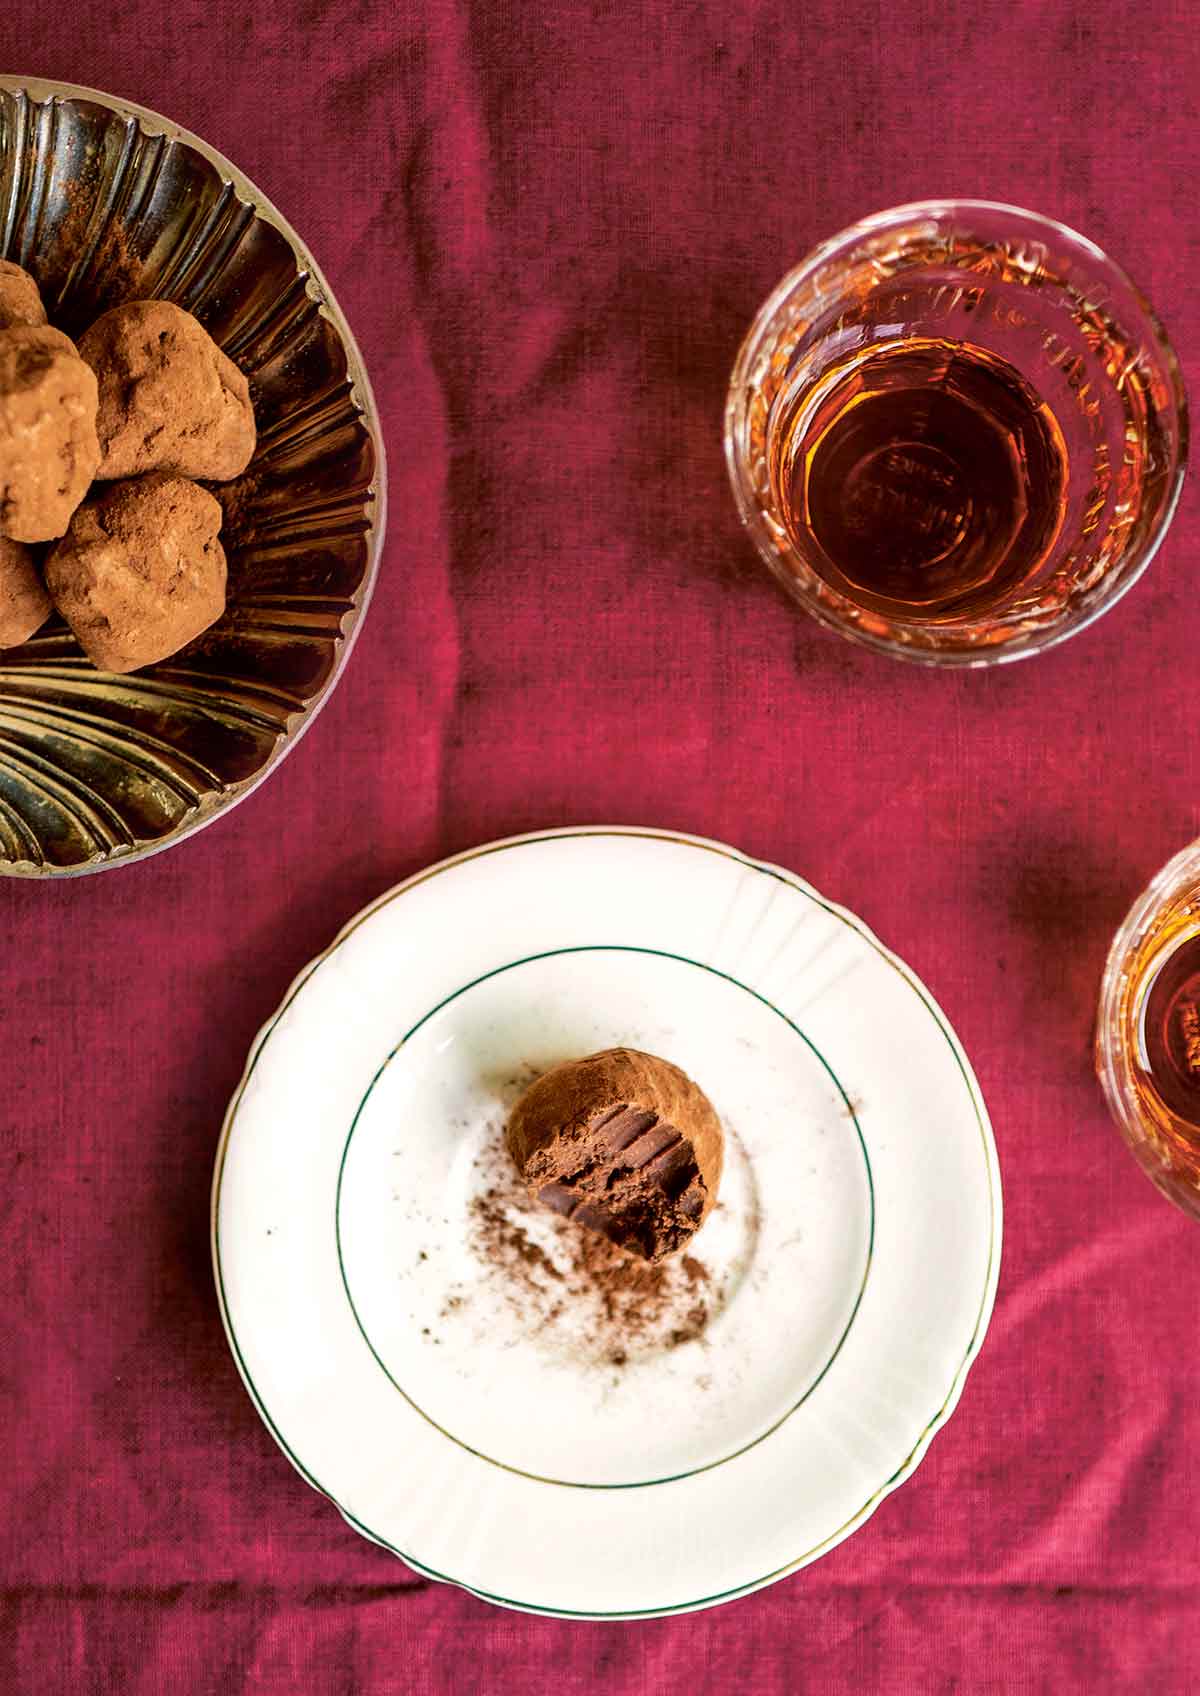 A chocolate salted caramel truffle with a bite taken out of it, on a white saucer, beside a bowl of truffles and two glasses.